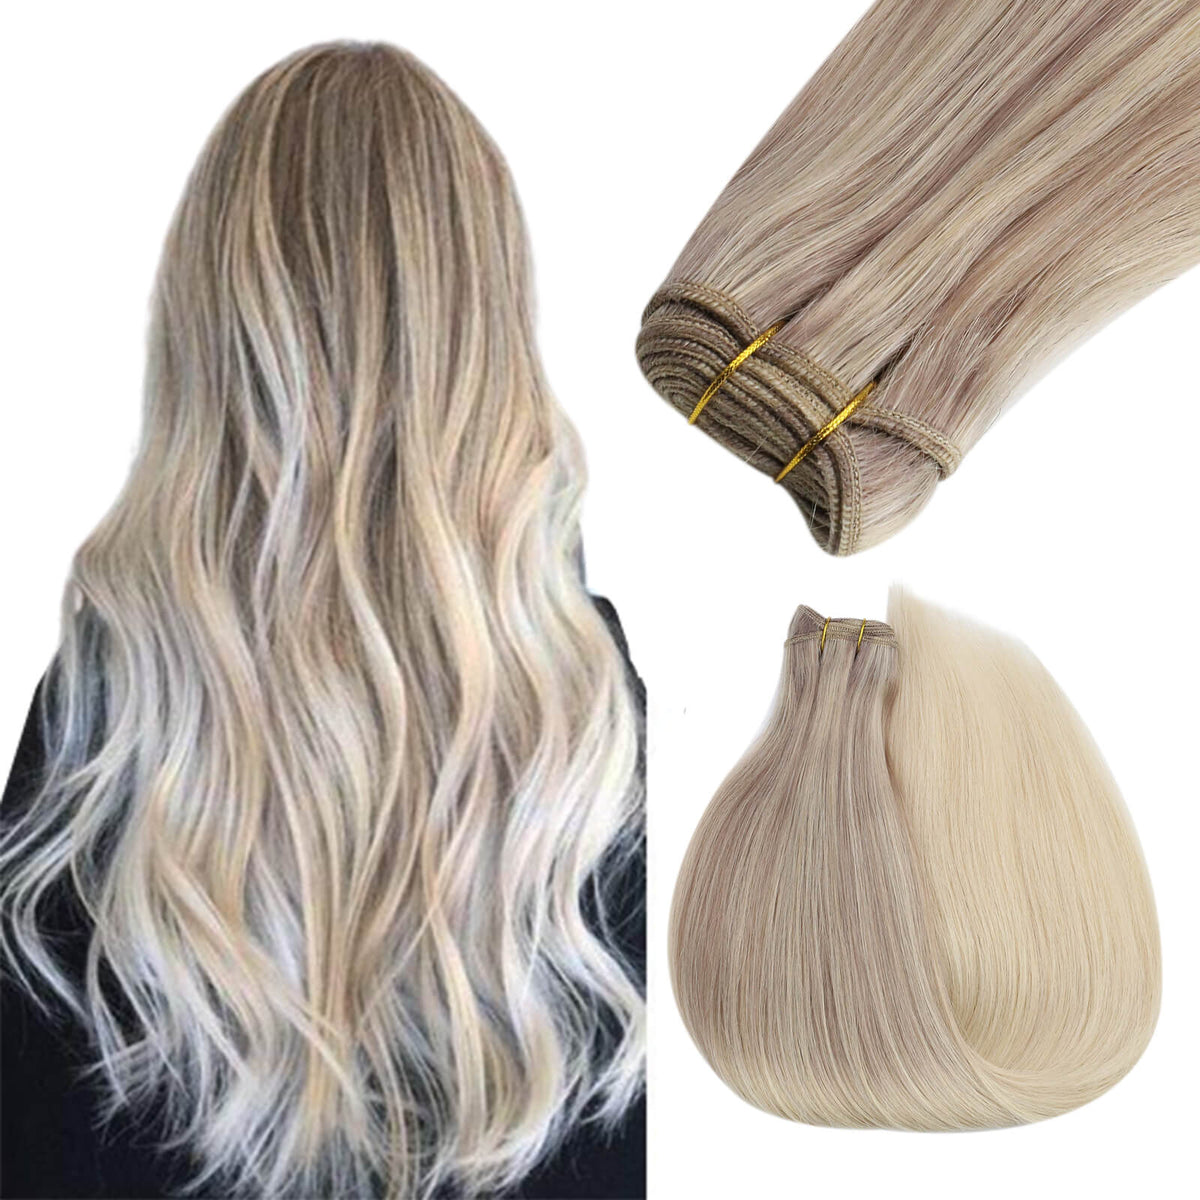 Sew in Weft Human Hair Extensions Balayage Blonde #Nordic